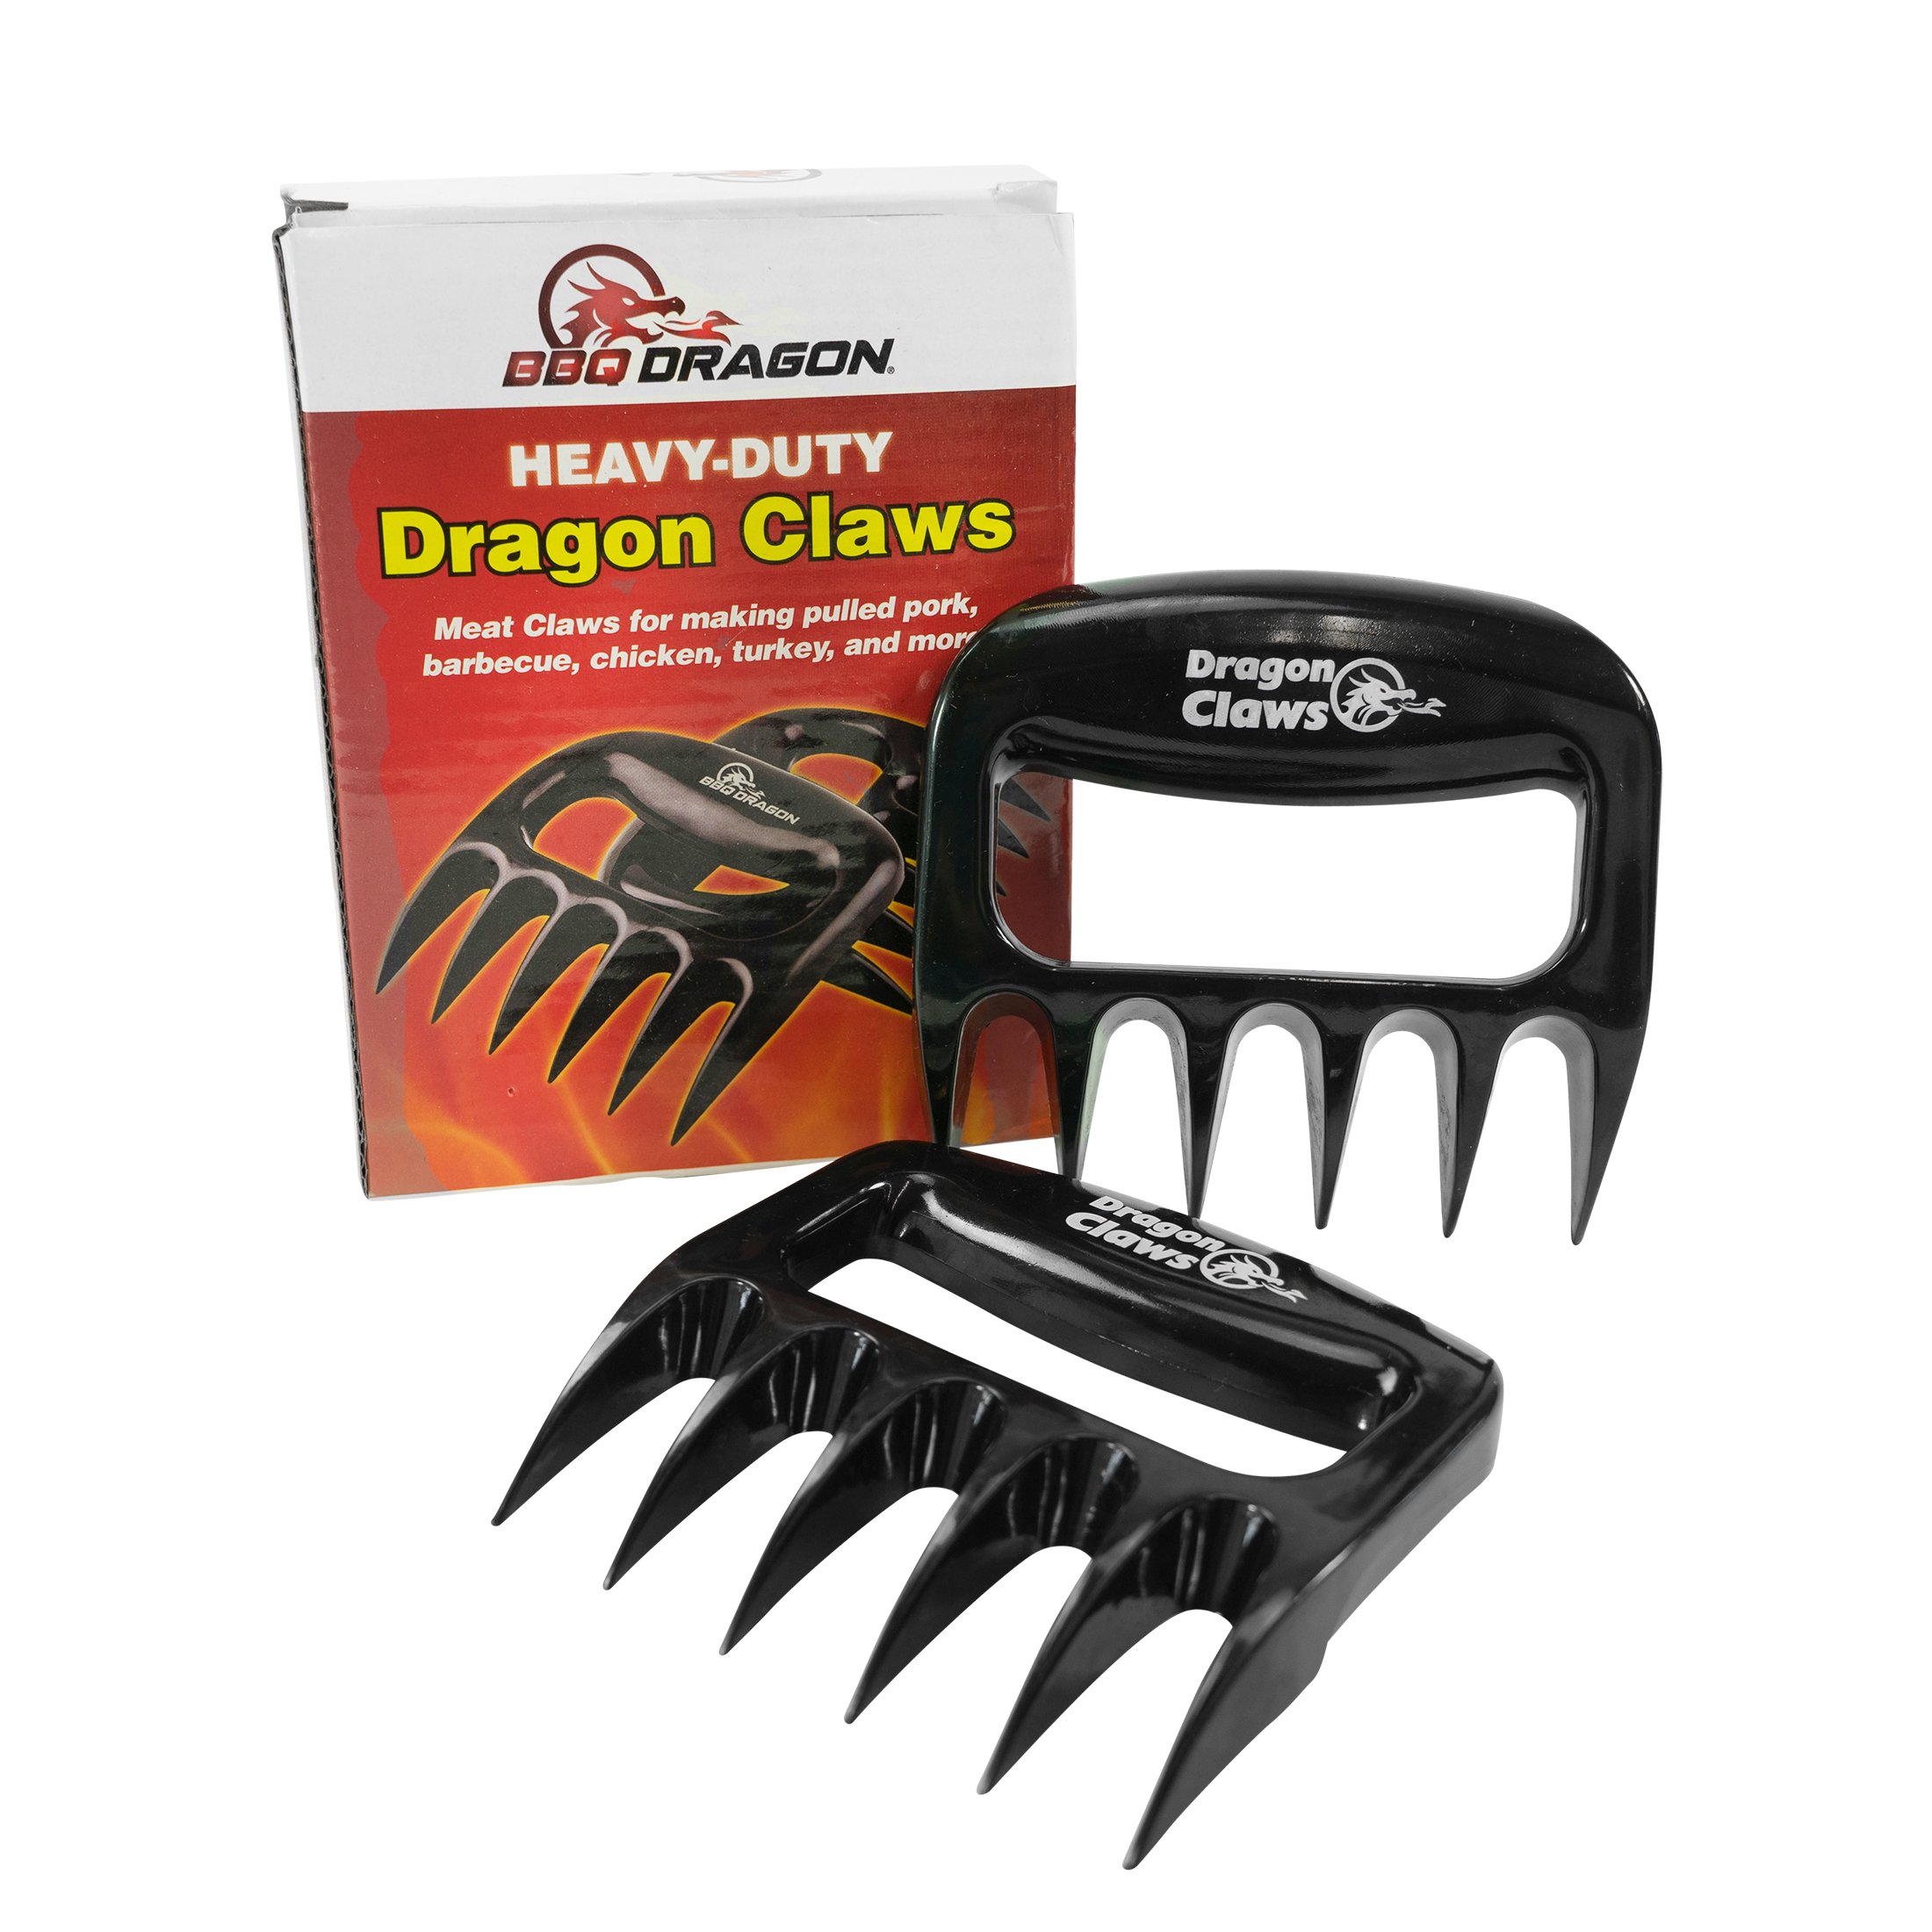 Grillight Claws, Grill - 2 claws